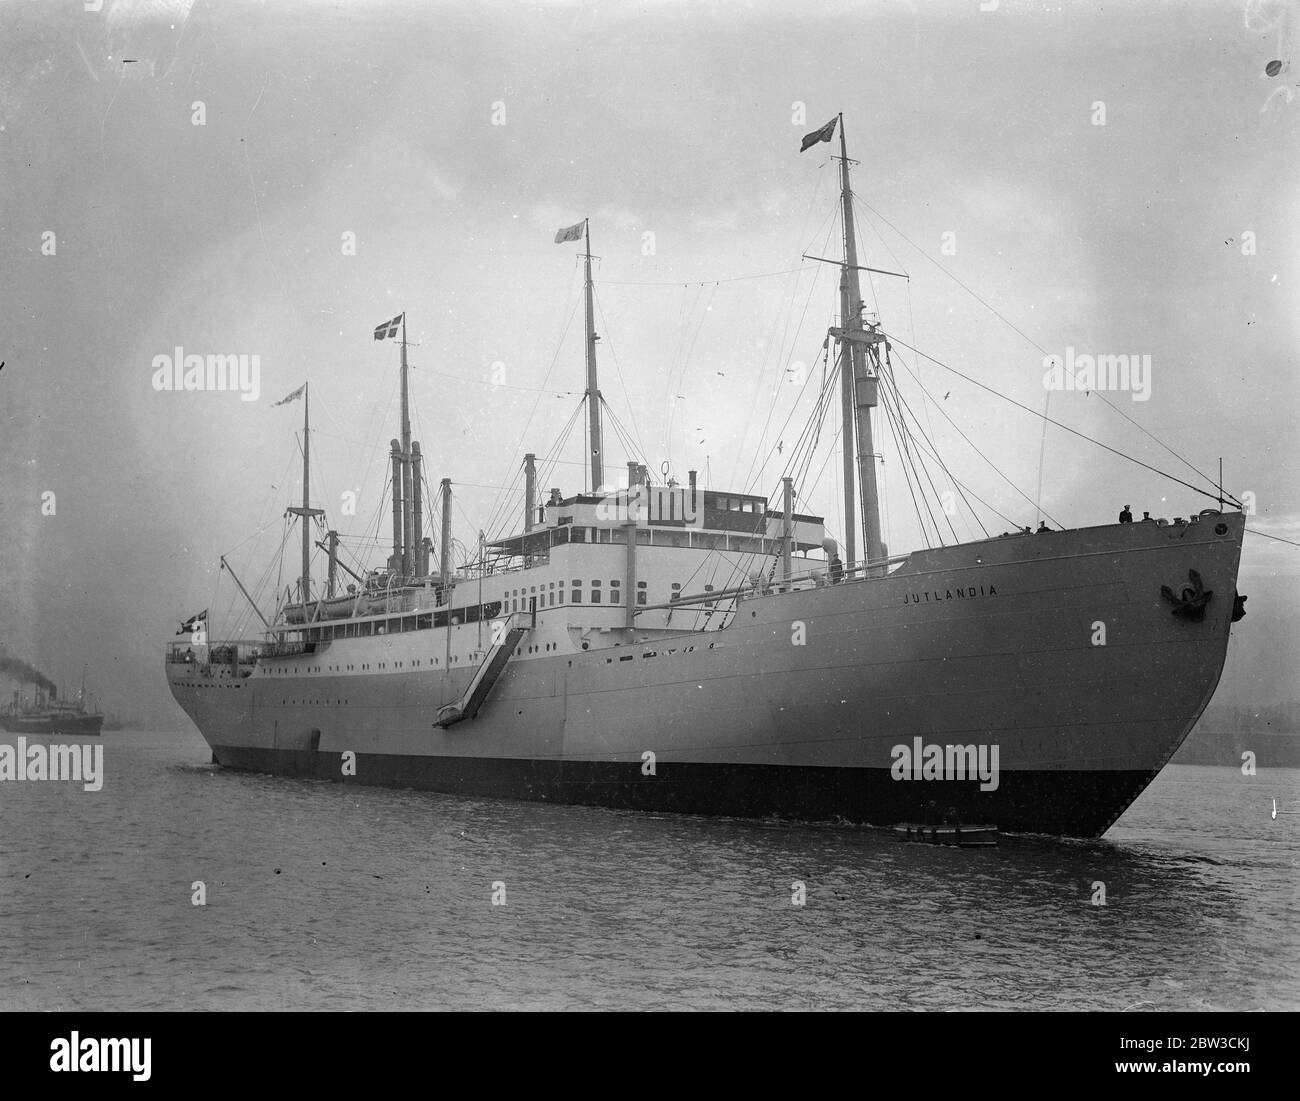 The Danish ship ,  Jutlandia  on the Thames at Tilbury which carried the King and Queen of Denmark arriving for the royal wedding . 26 November 1934 Stock Photo